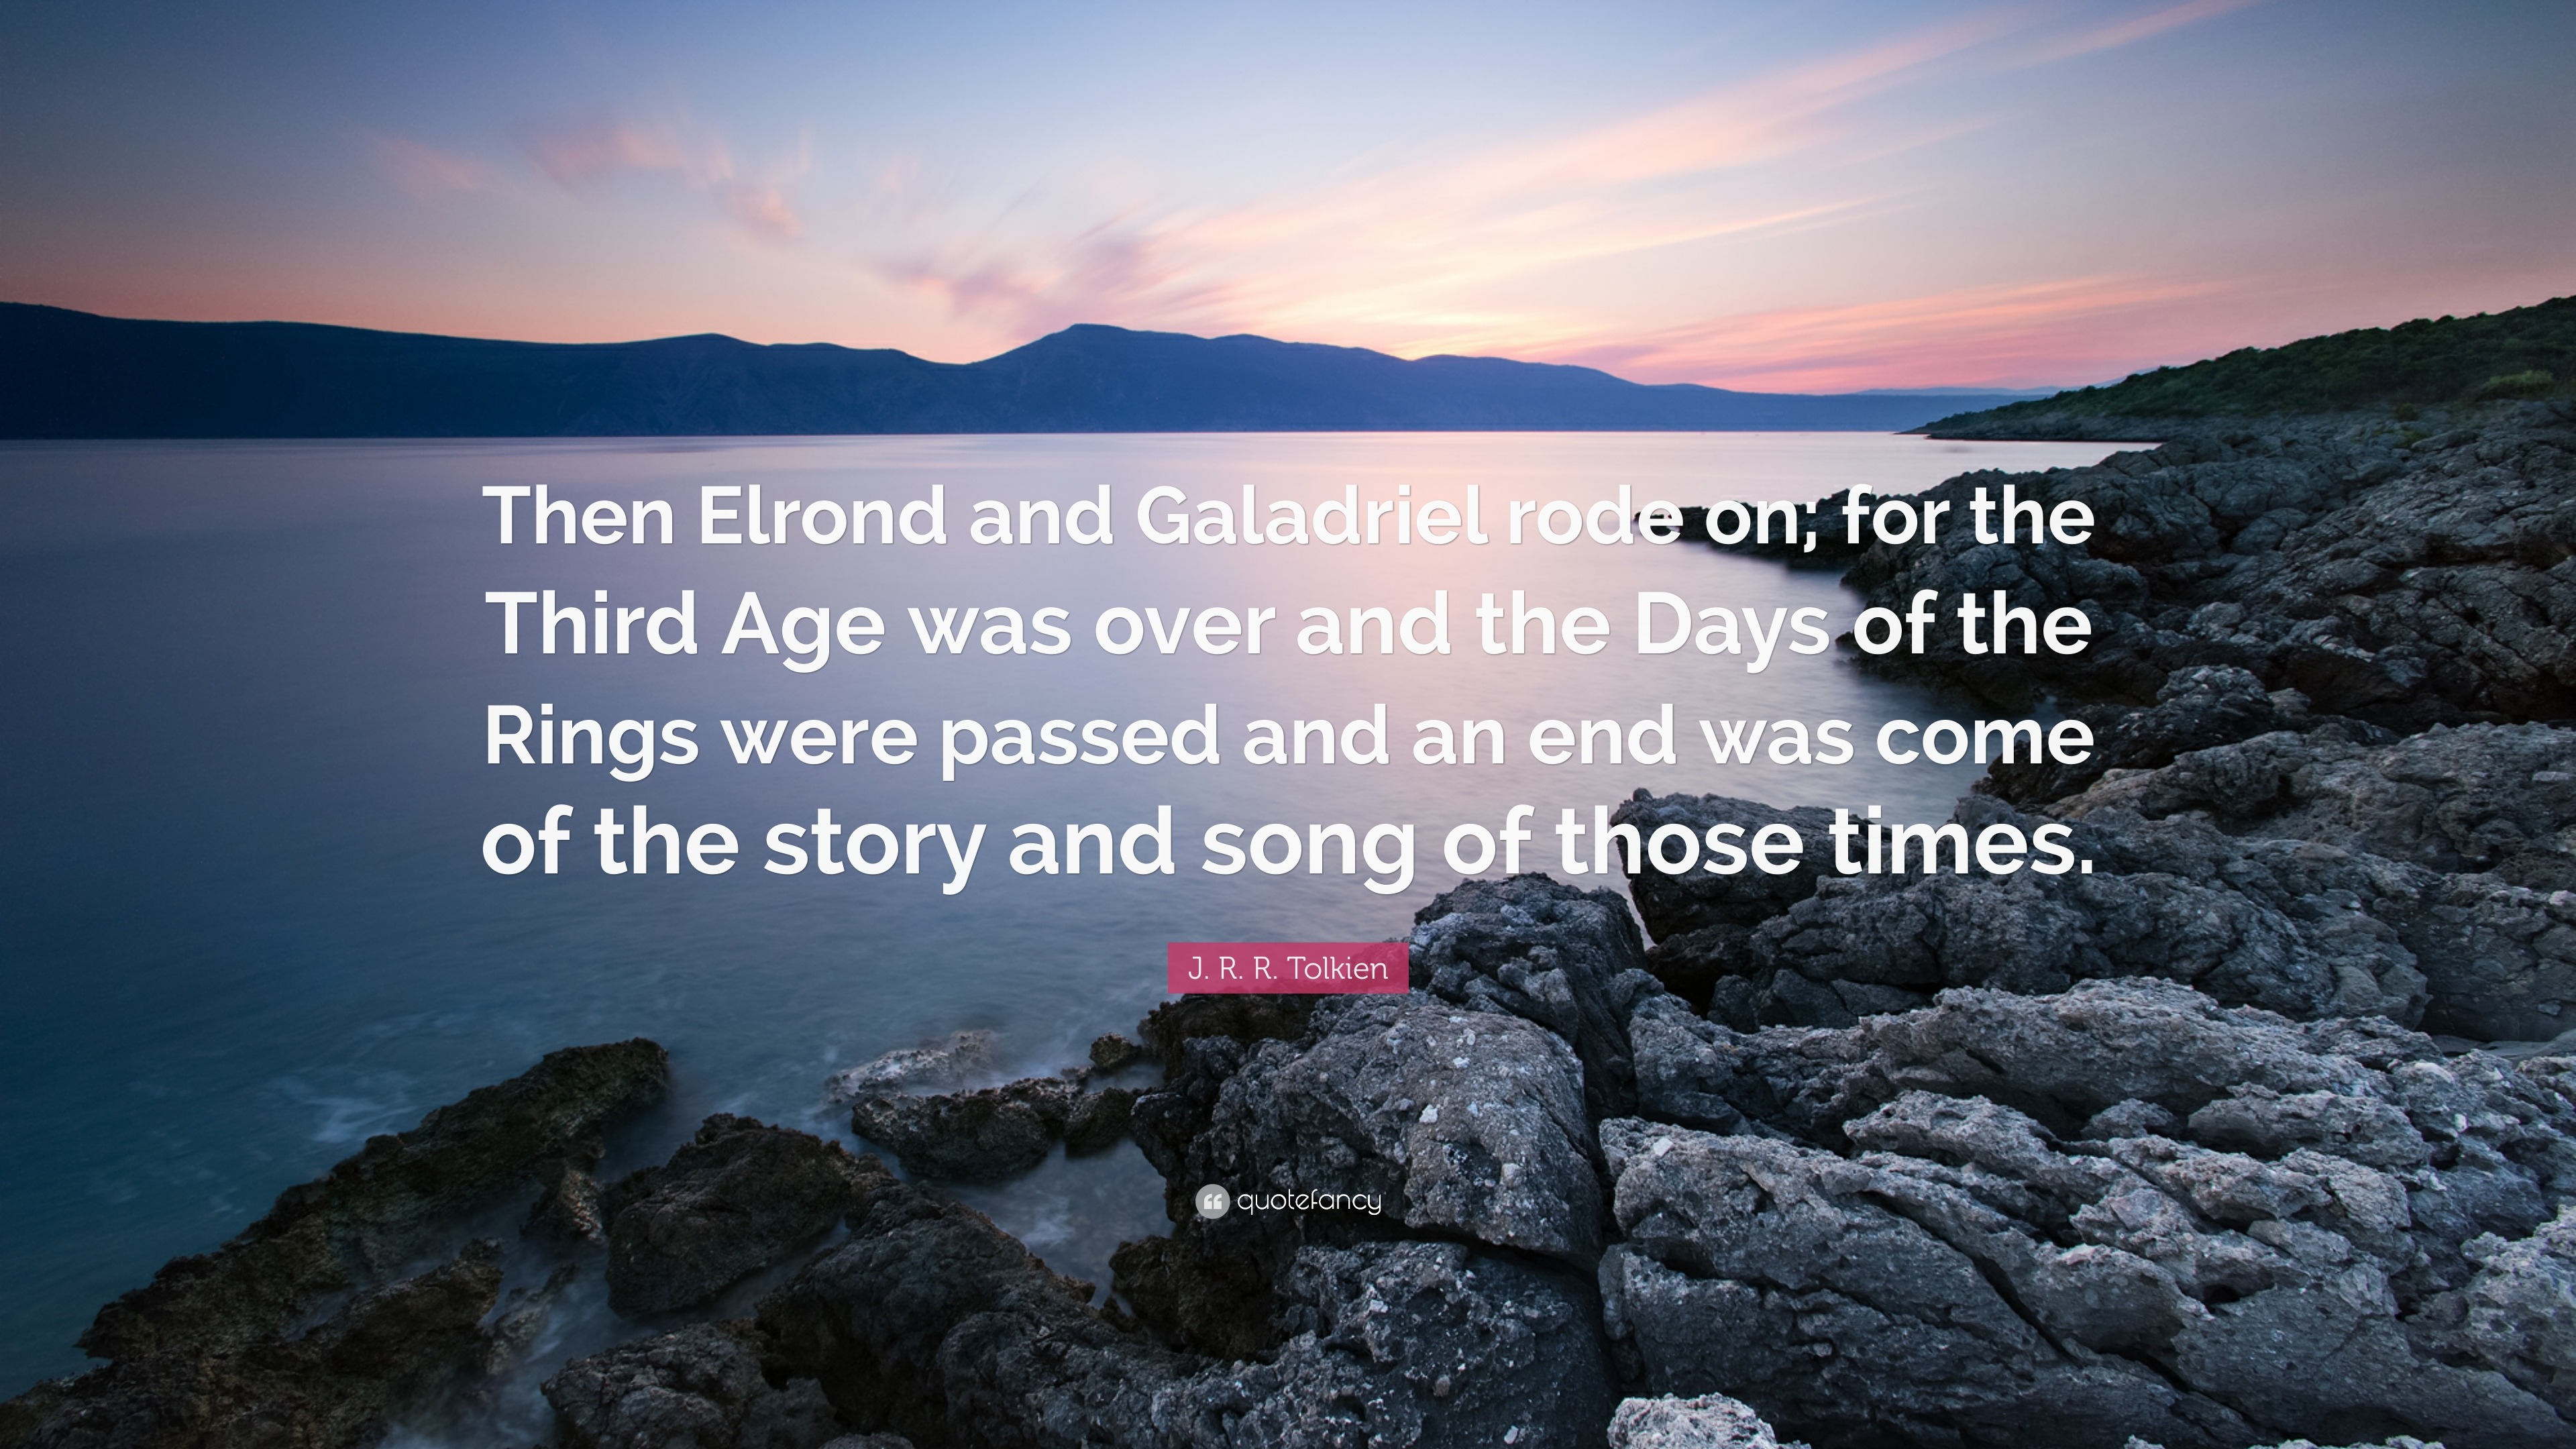 J. R. R. Tolkien Quote: “Then Elrond and Galadriel rode on; for the Third  Age was over and the Days of the Rings were passed and an end was come ”